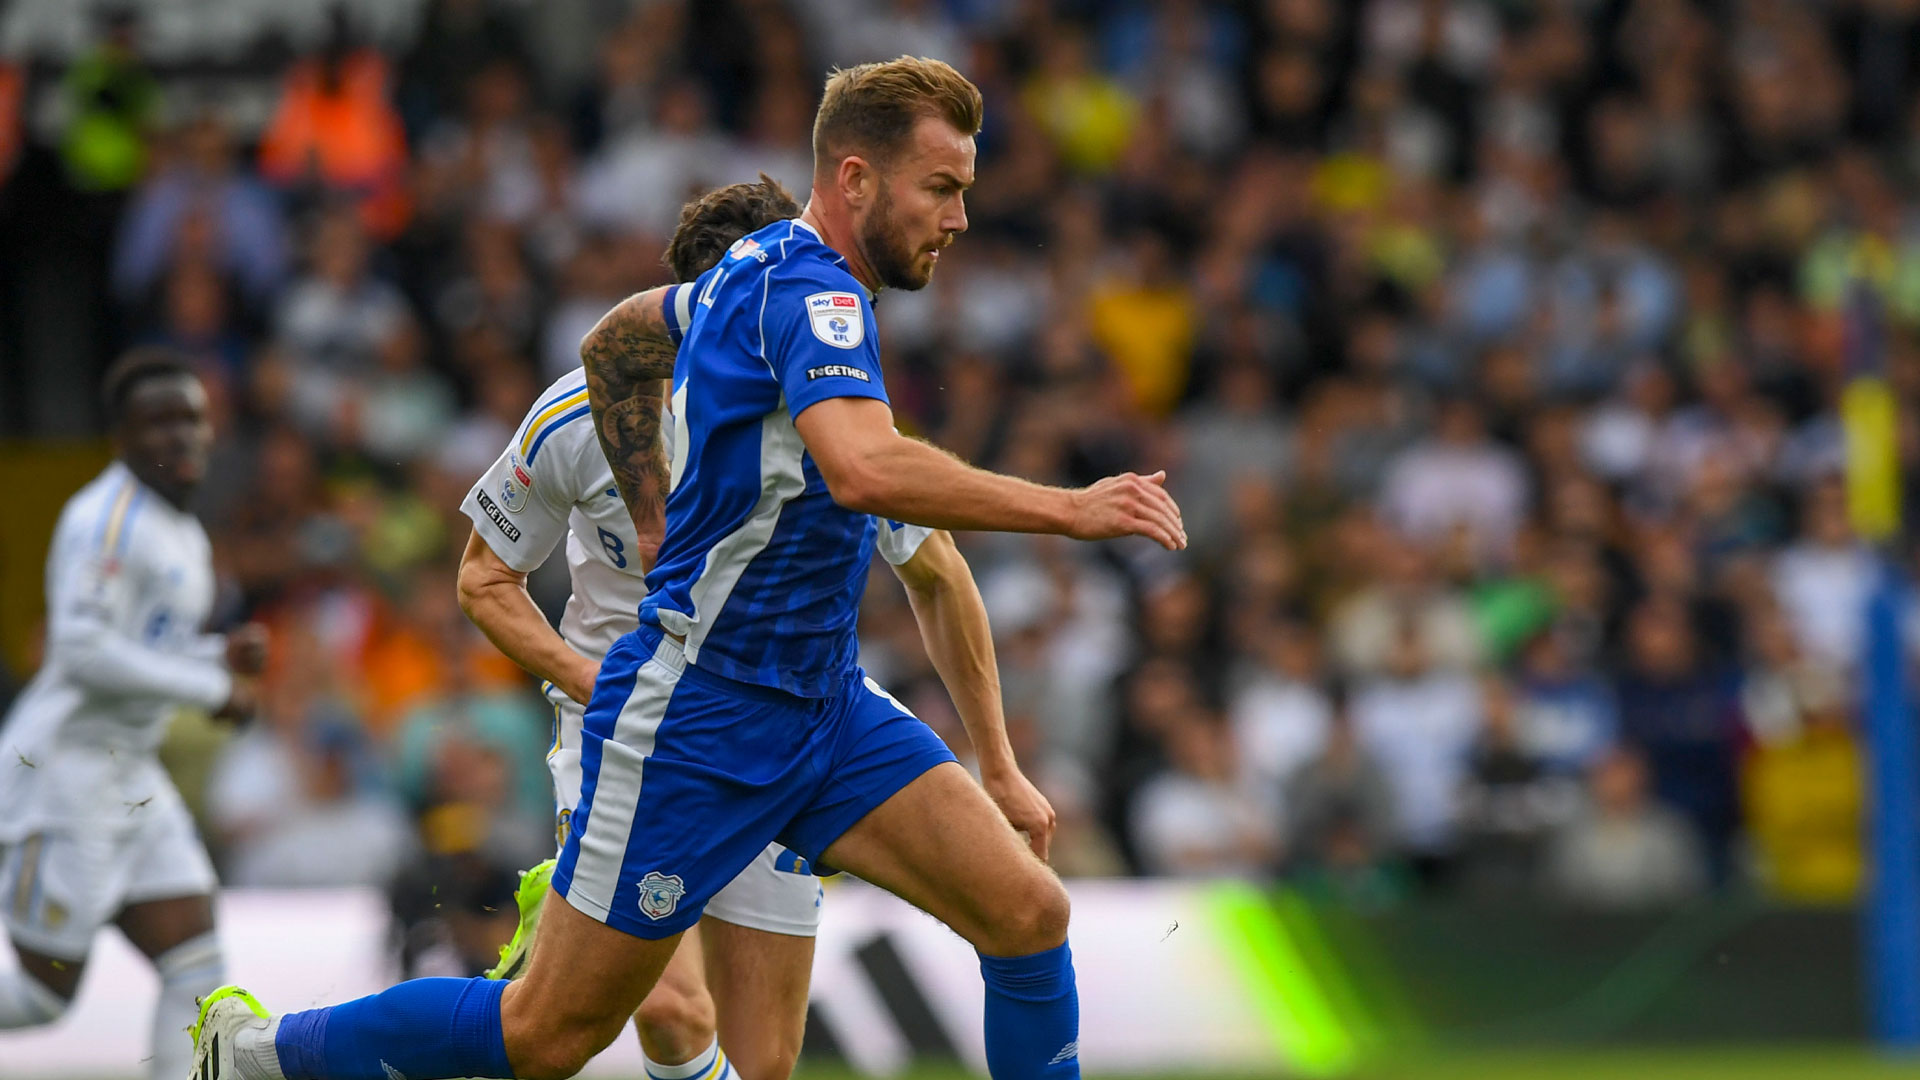 Joe Ralls in action for Cardiff City against Leeds United